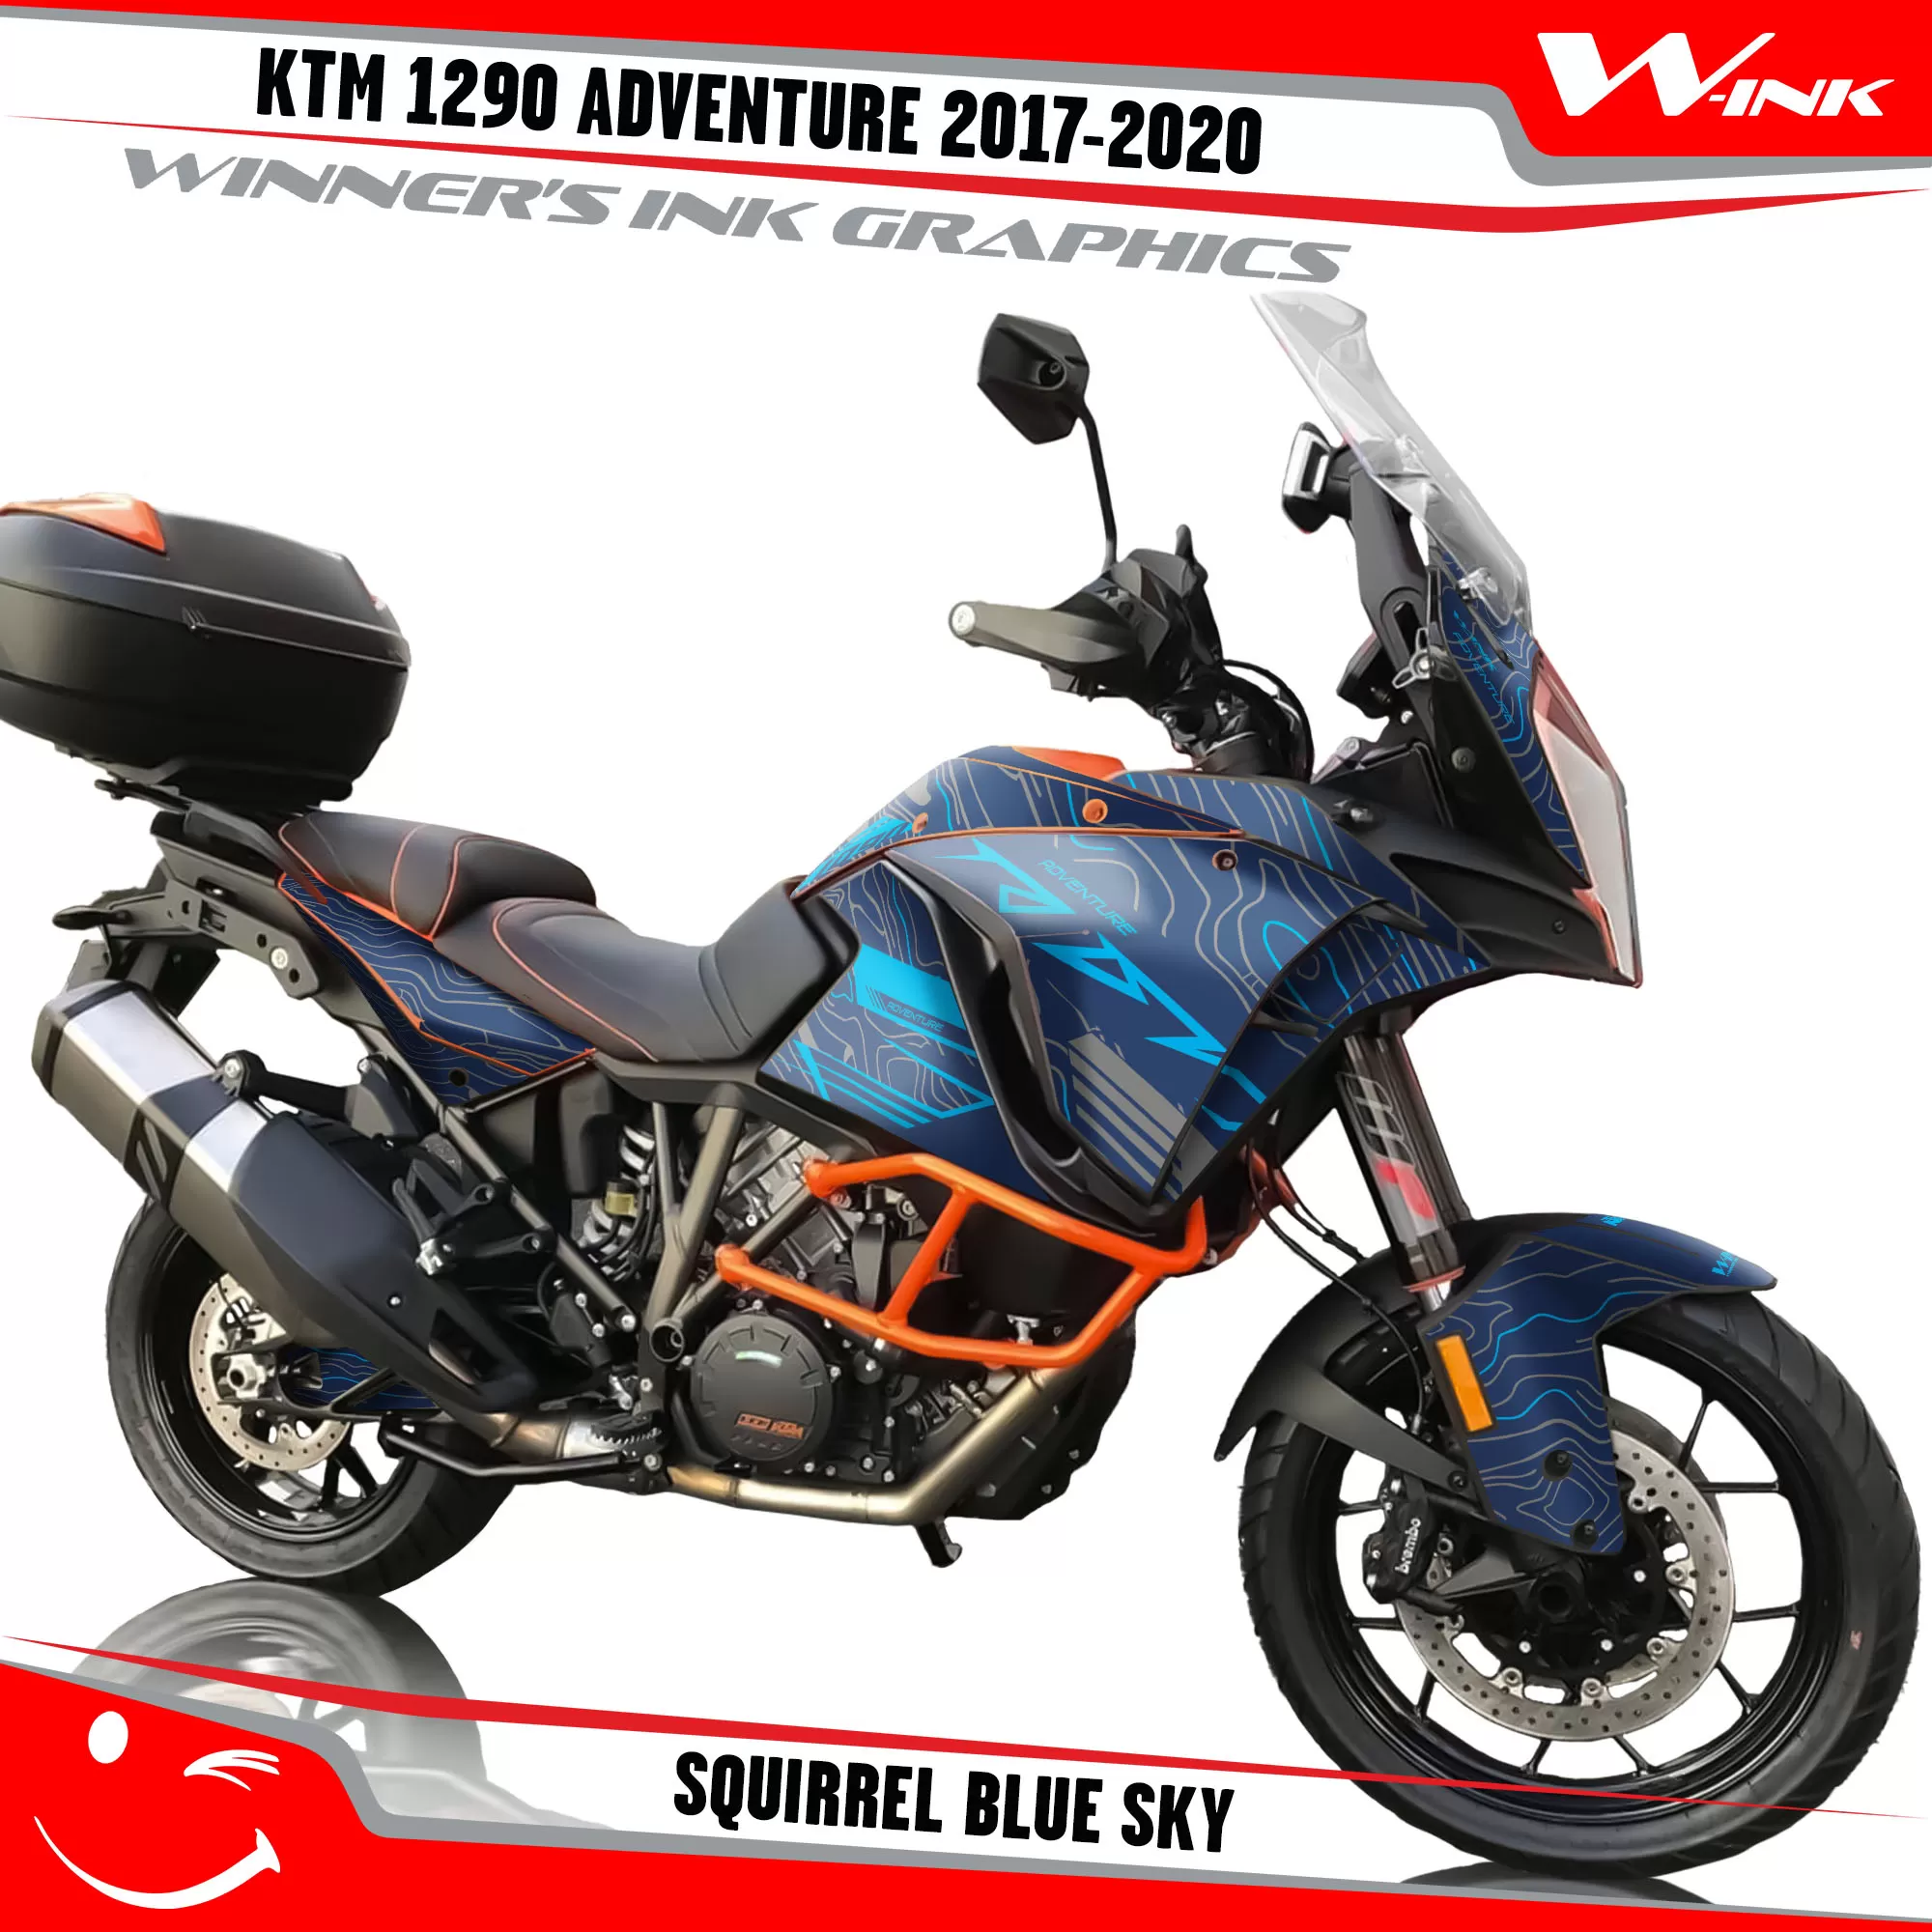 KTM-Adventure-1290-2017-2018-2019-2020-graphics-kit-and-decals-Squirrel-Blue-Sky